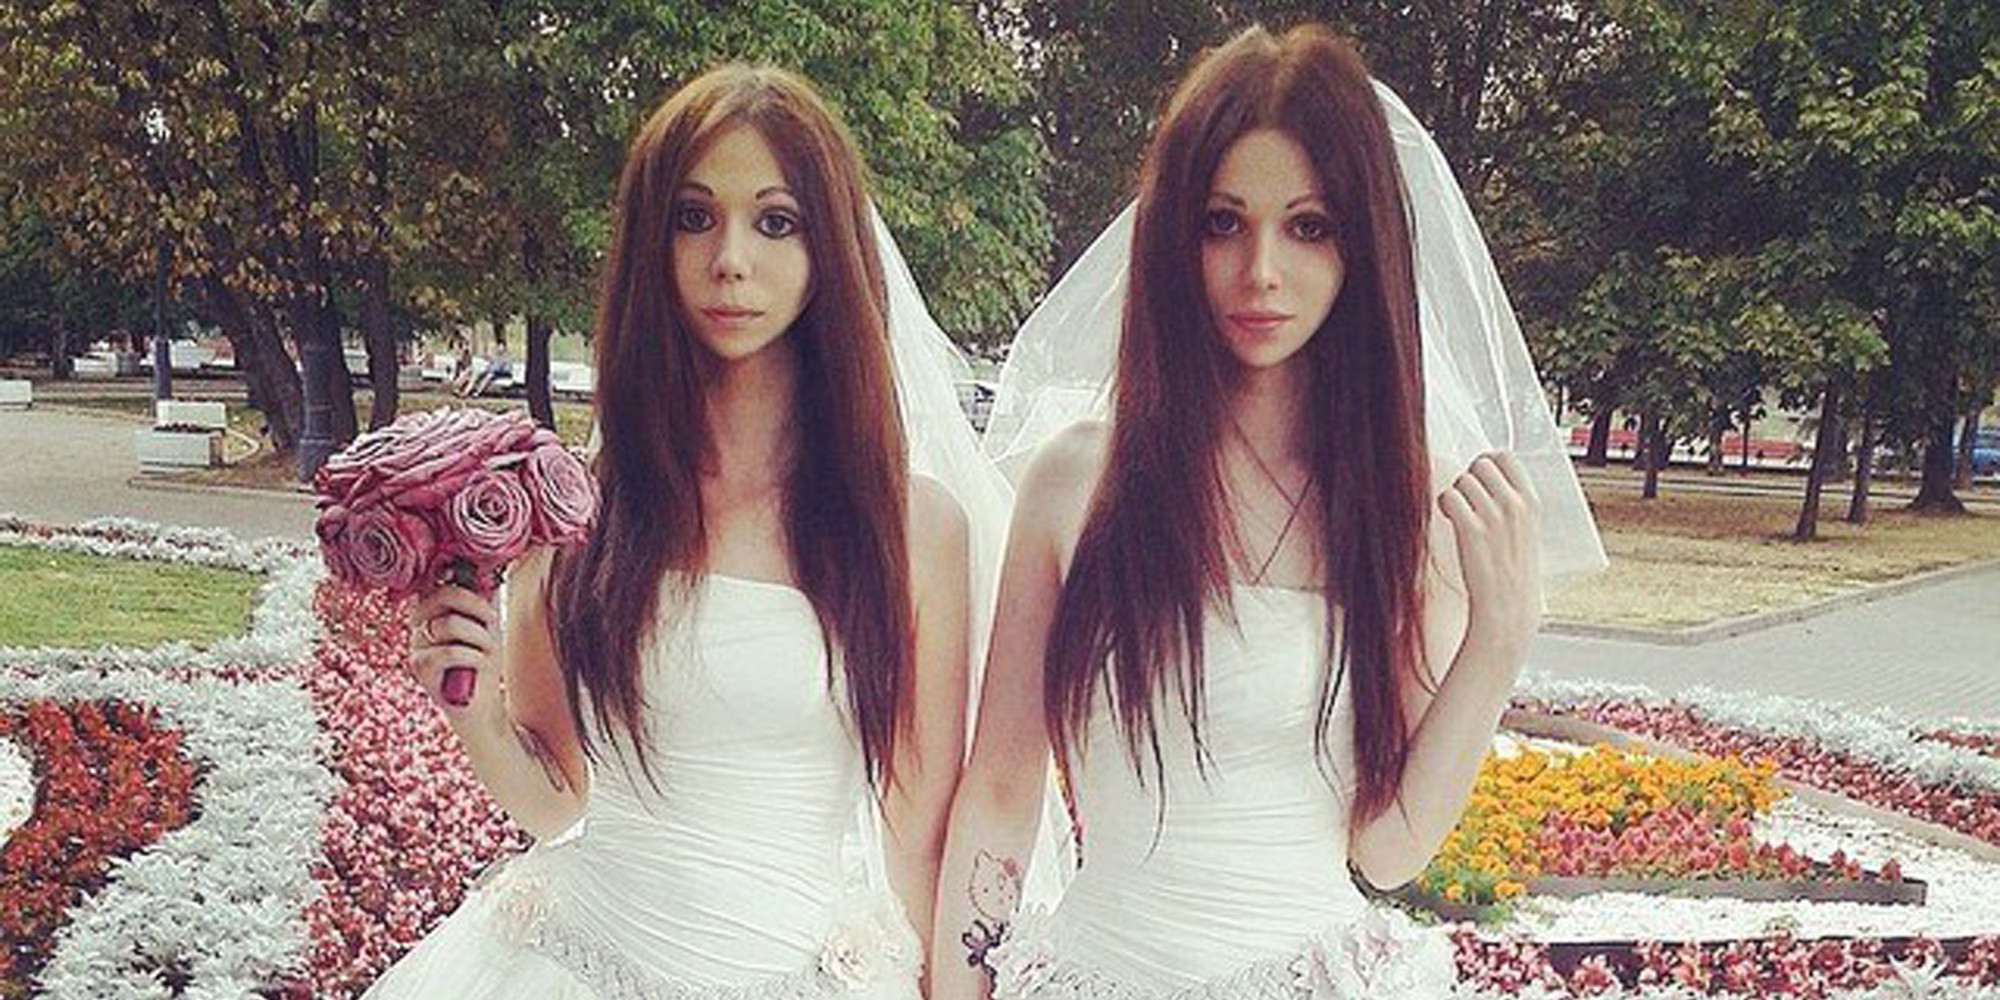 And Mysterious Russian Bride 79